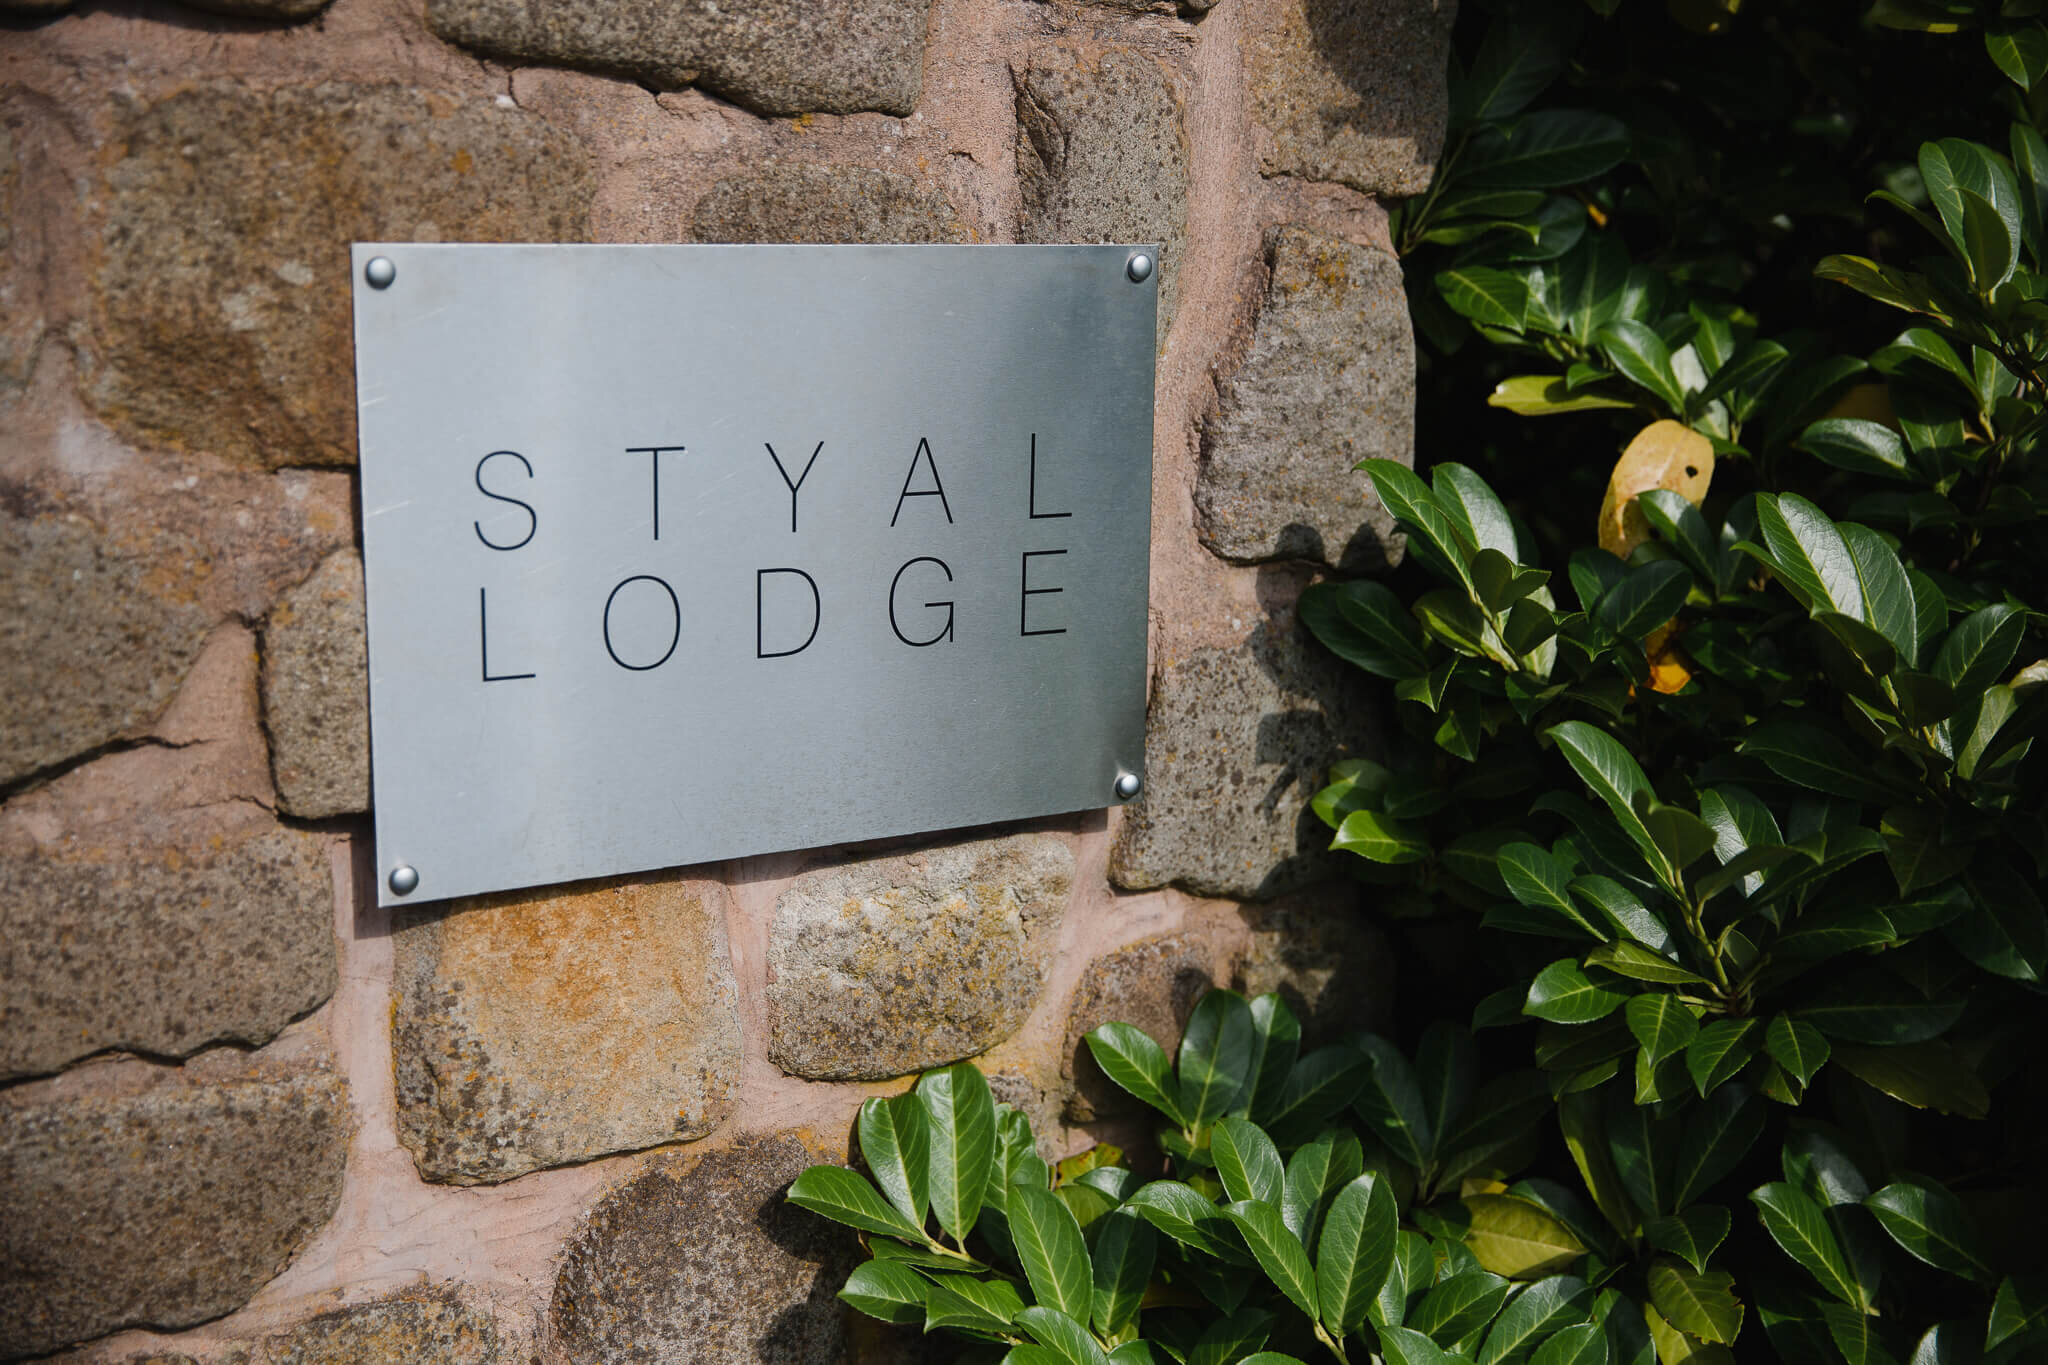 Styal lodge signpost for guests to follow when they arrived. 